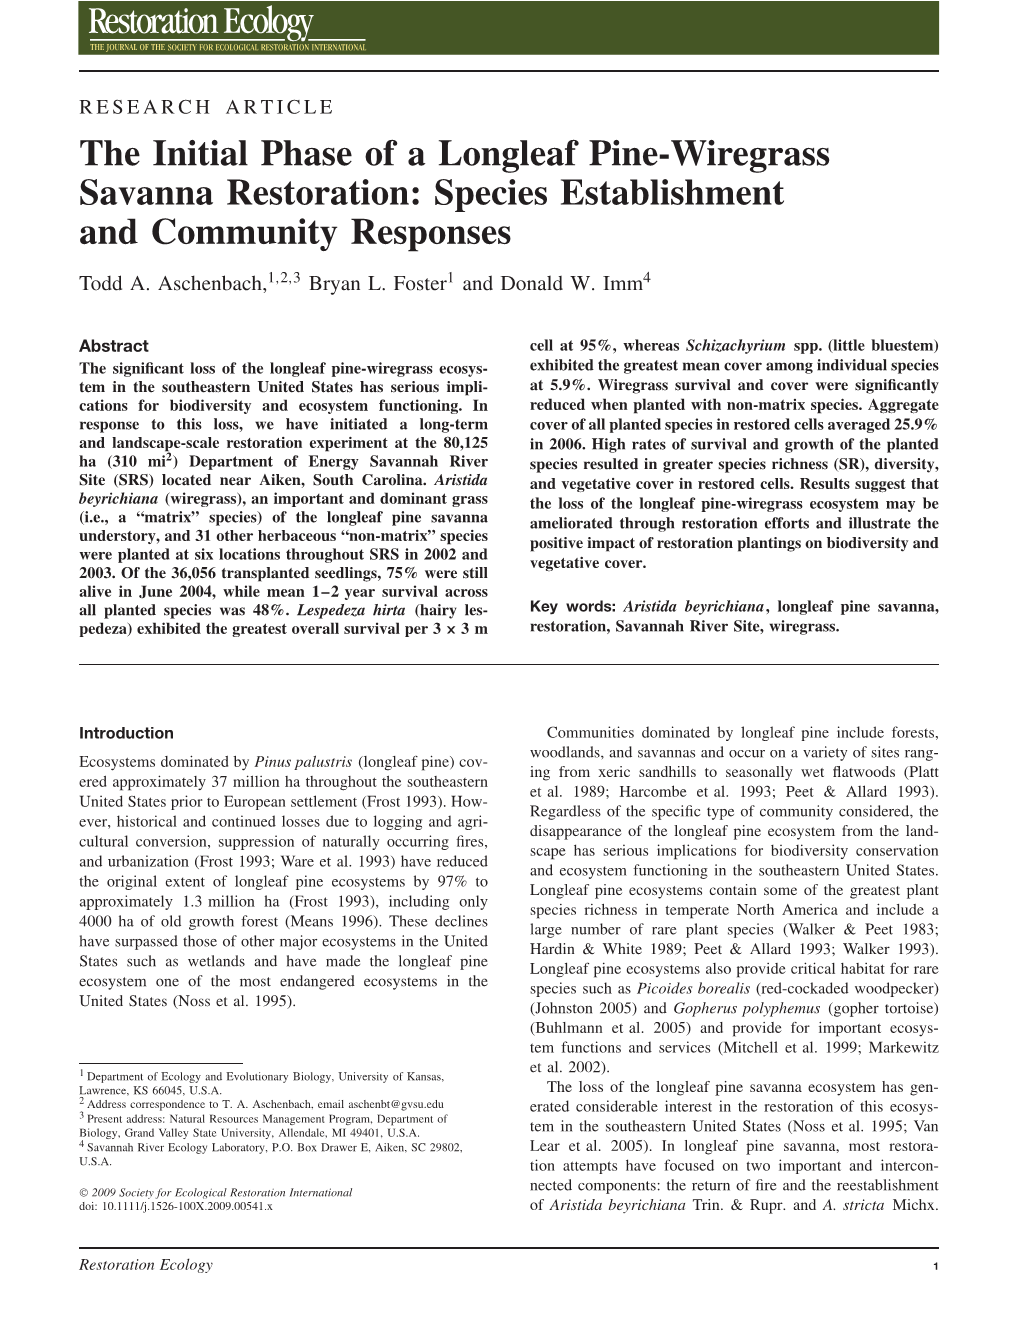 The Initial Phase of a Longleaf Pine-Wiregrass Savanna Restoration: Species Establishment and Community Responses